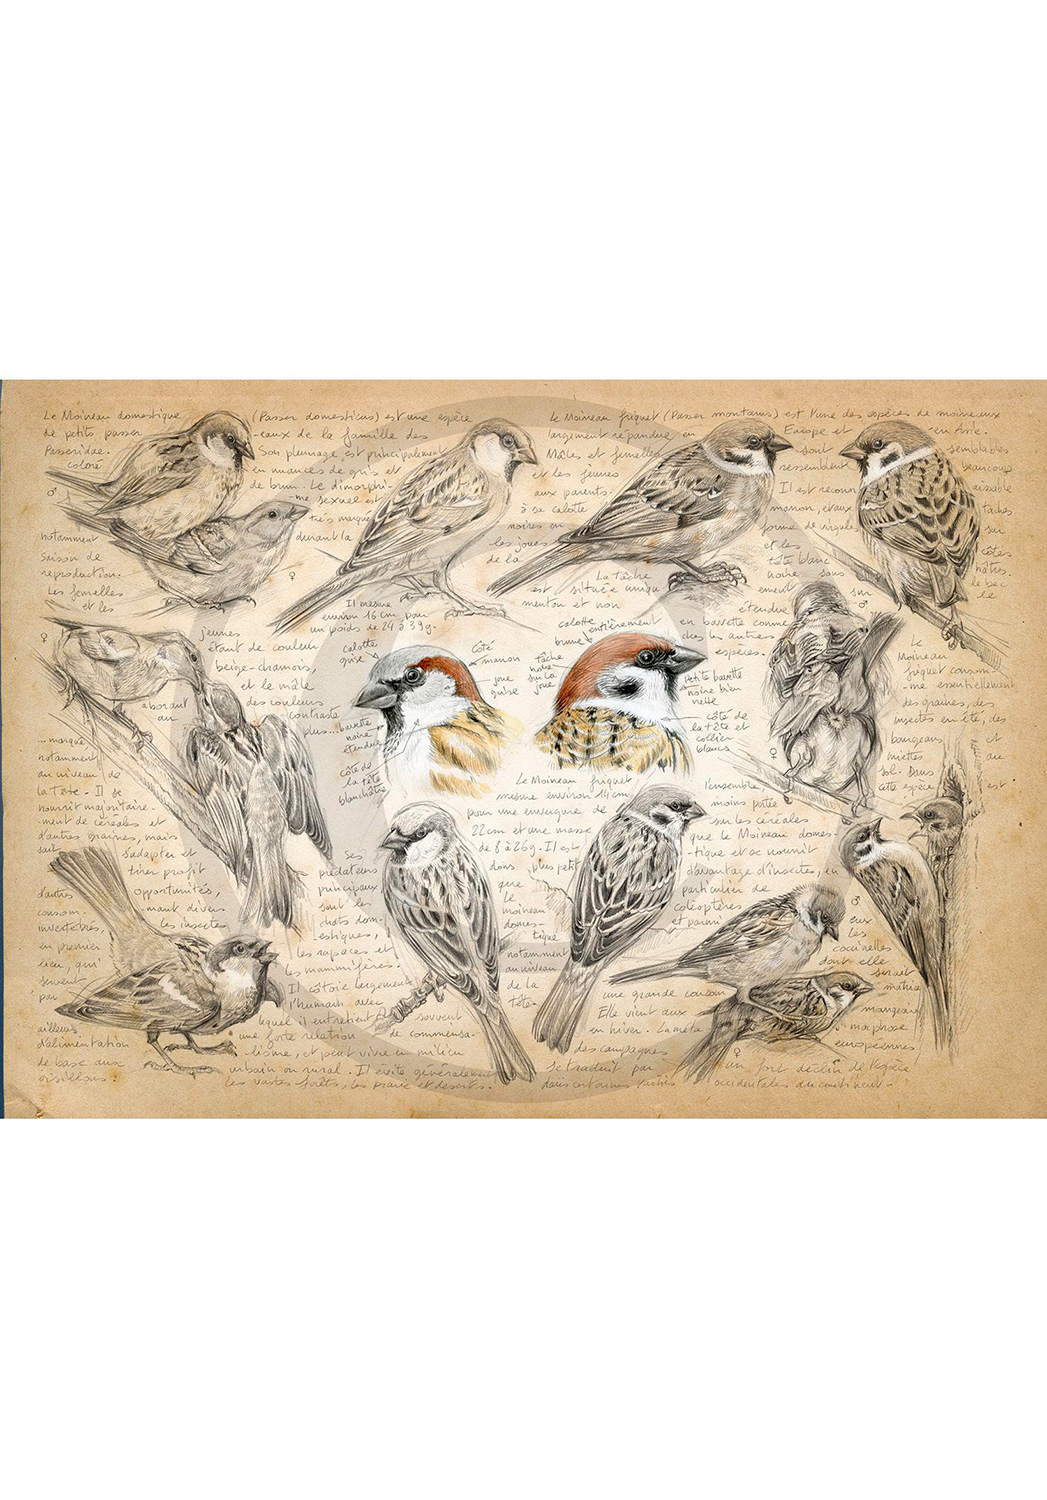 Marcello-art: Wish Card 333 - House sparrow and tree sparrow